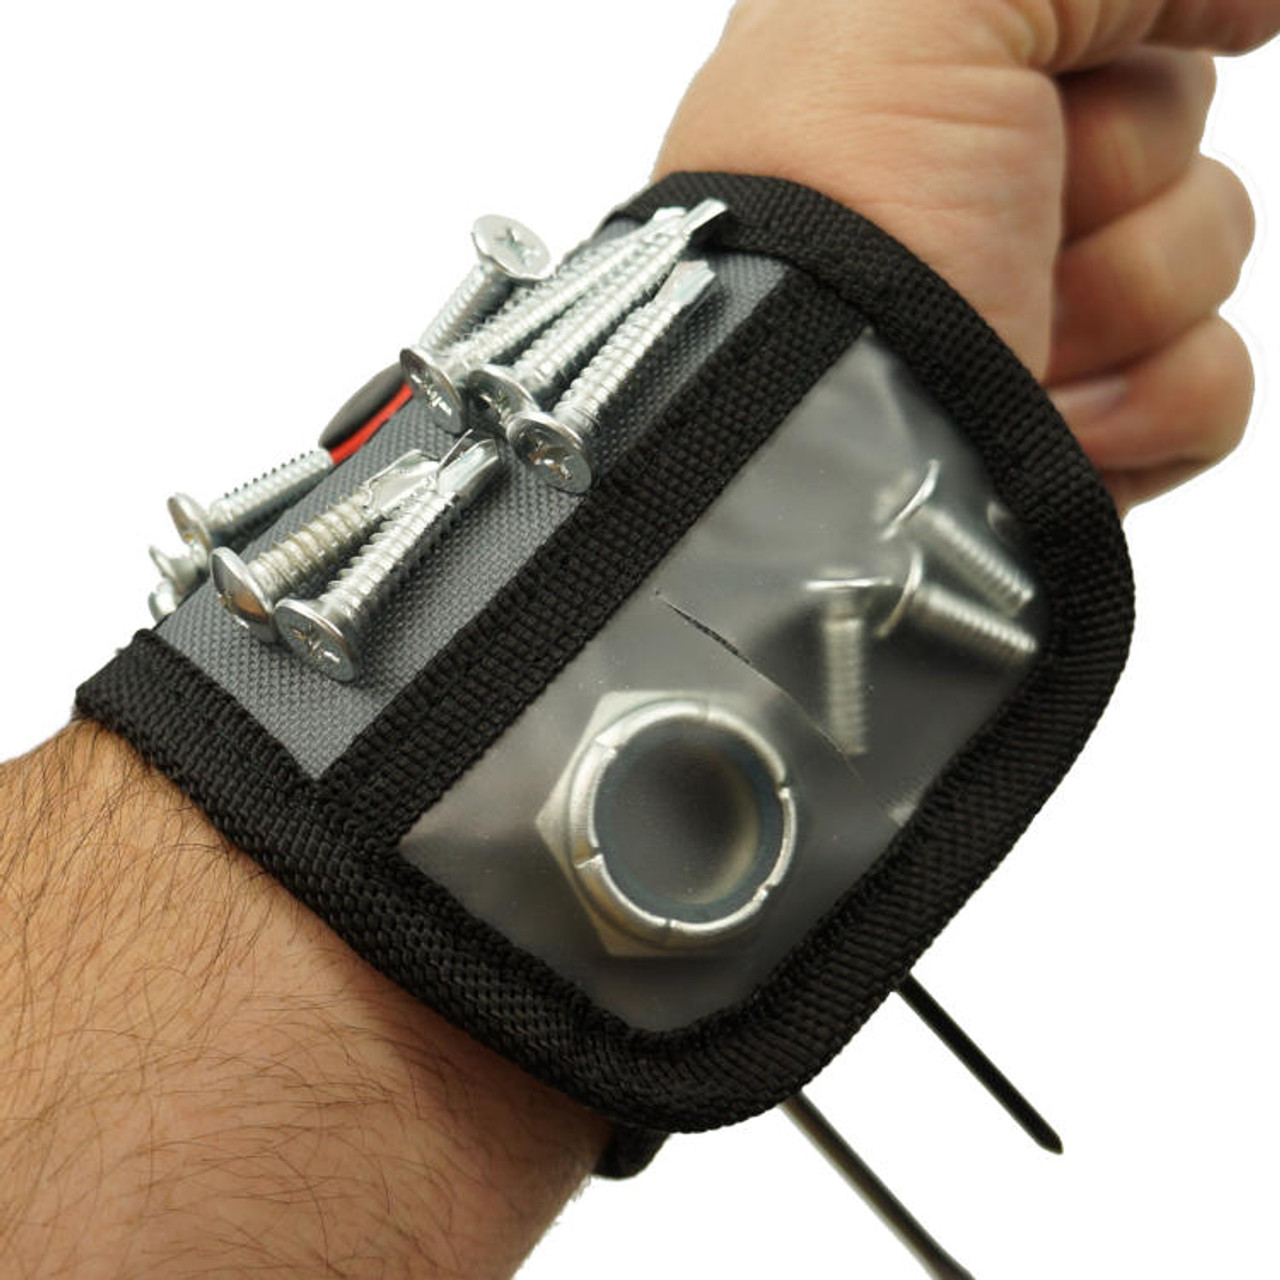 Magnetic Wristband – Practical-Store